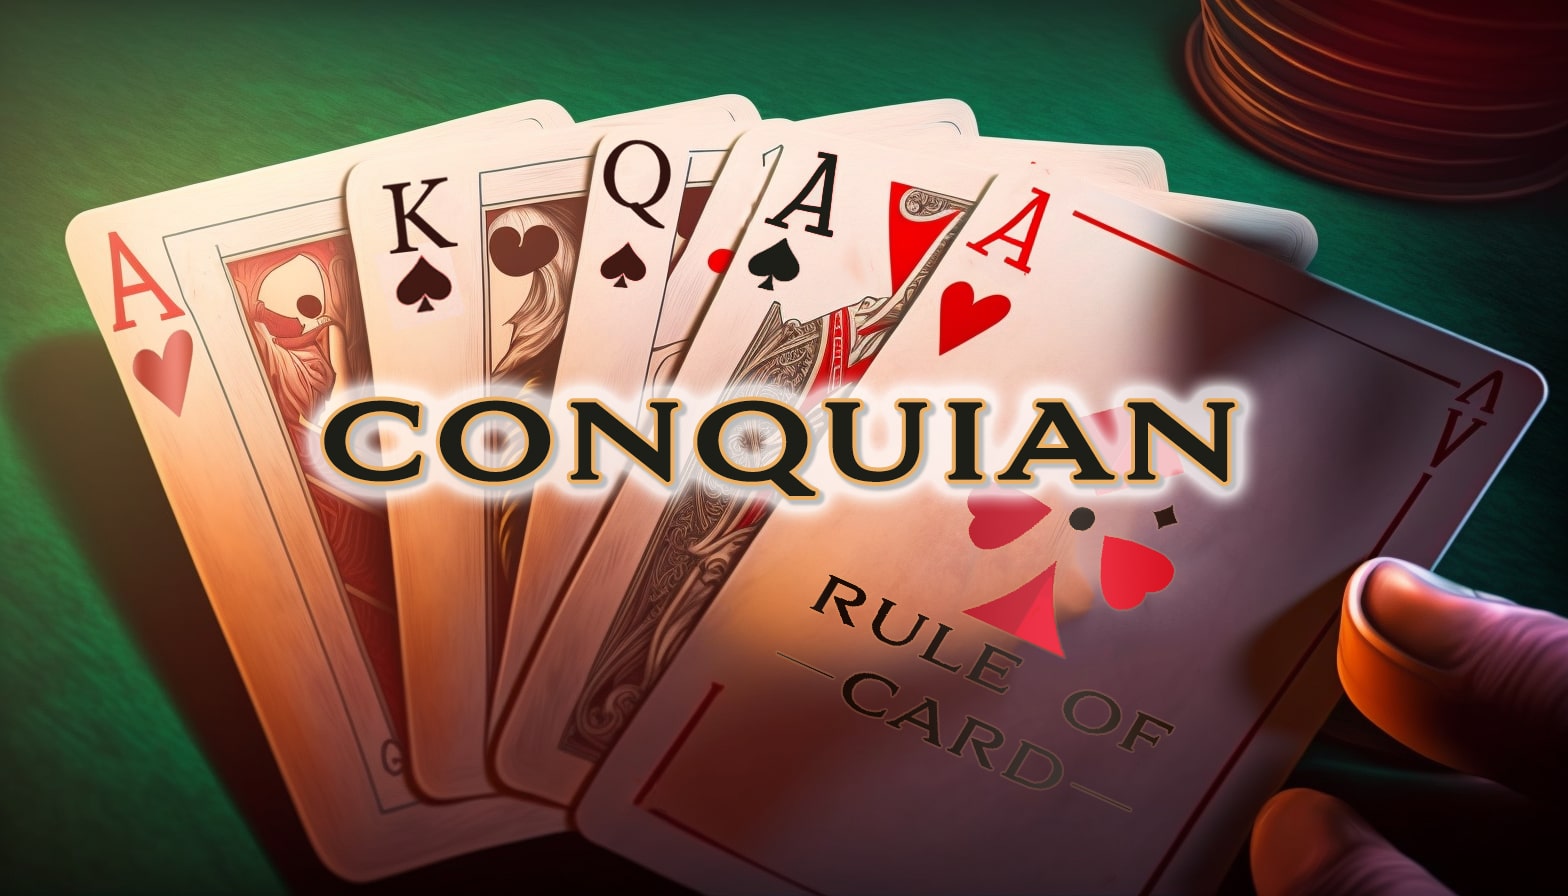 Playing the card game Conquian